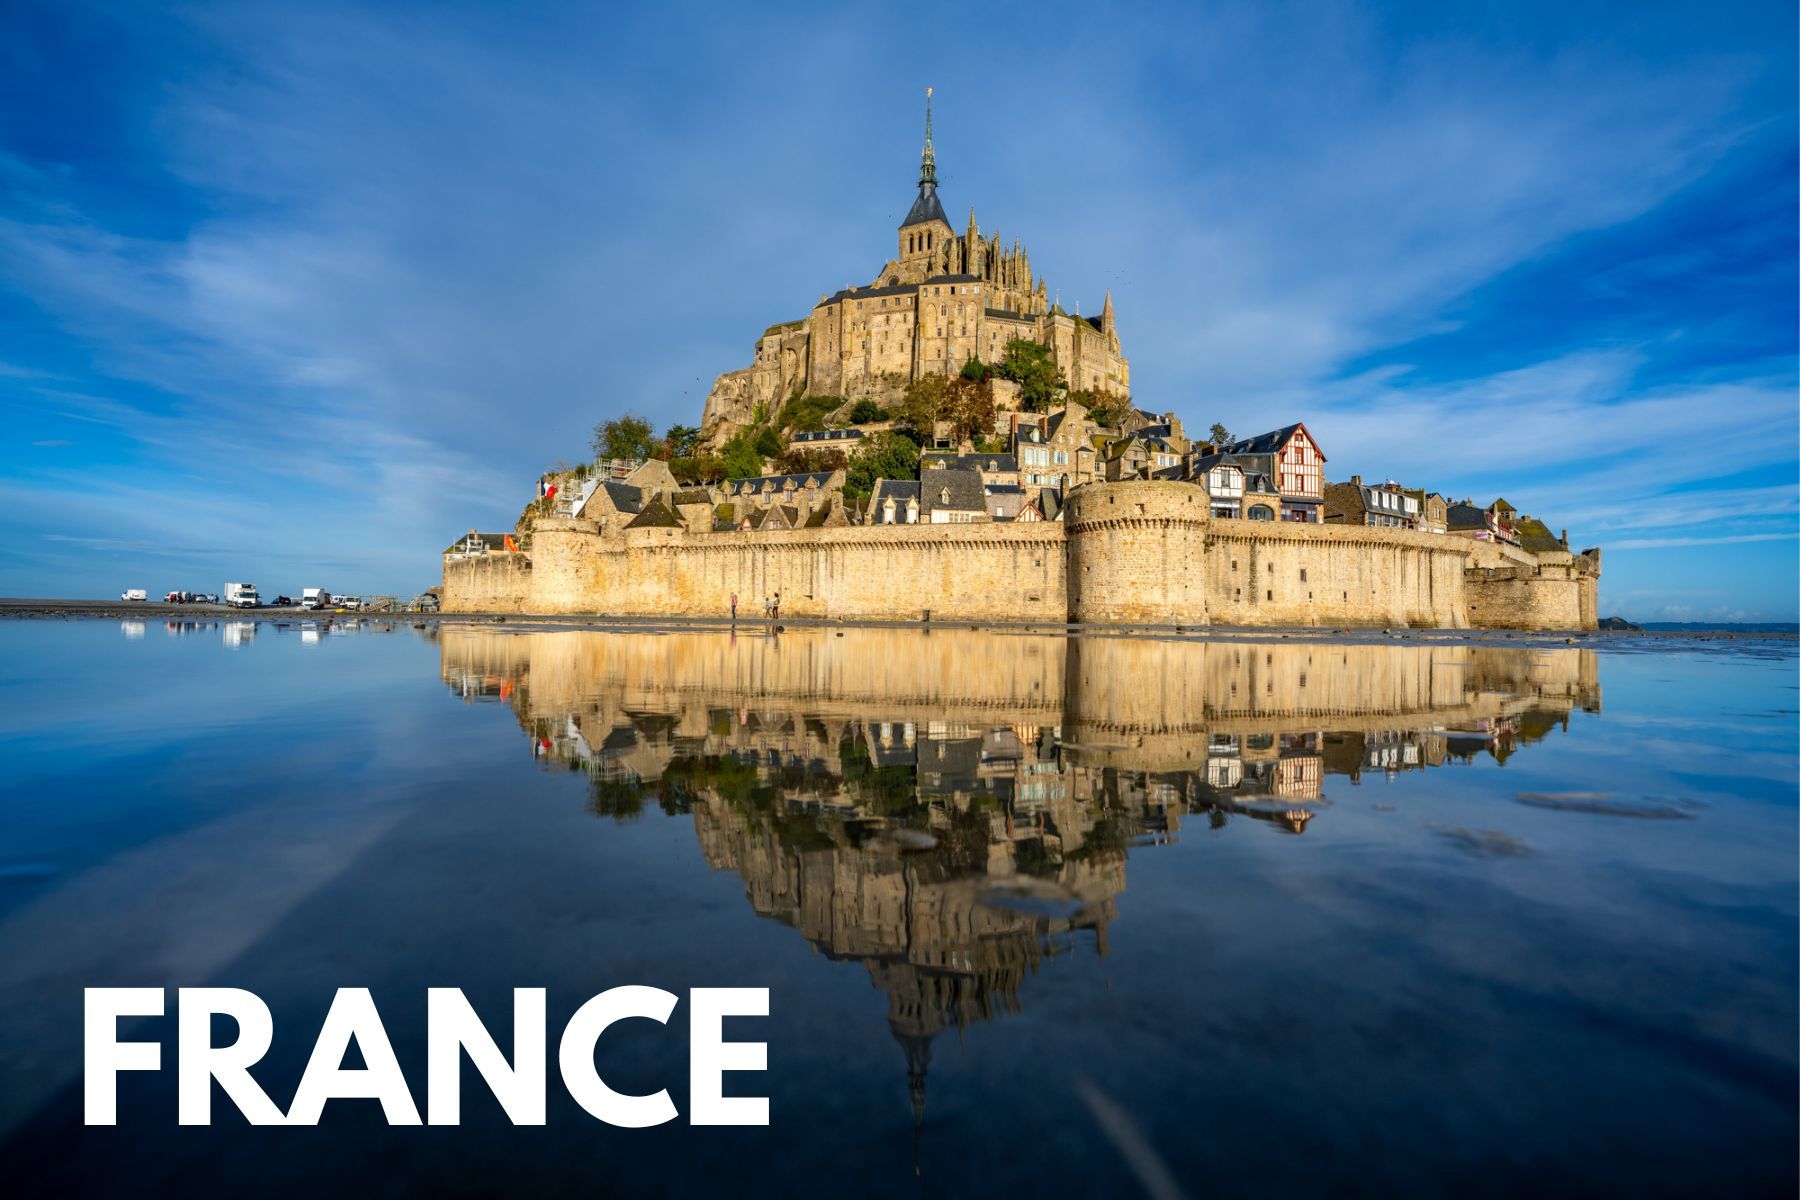 Photo of Mont St Michel walled city reflecting in shallow water on a beach in France